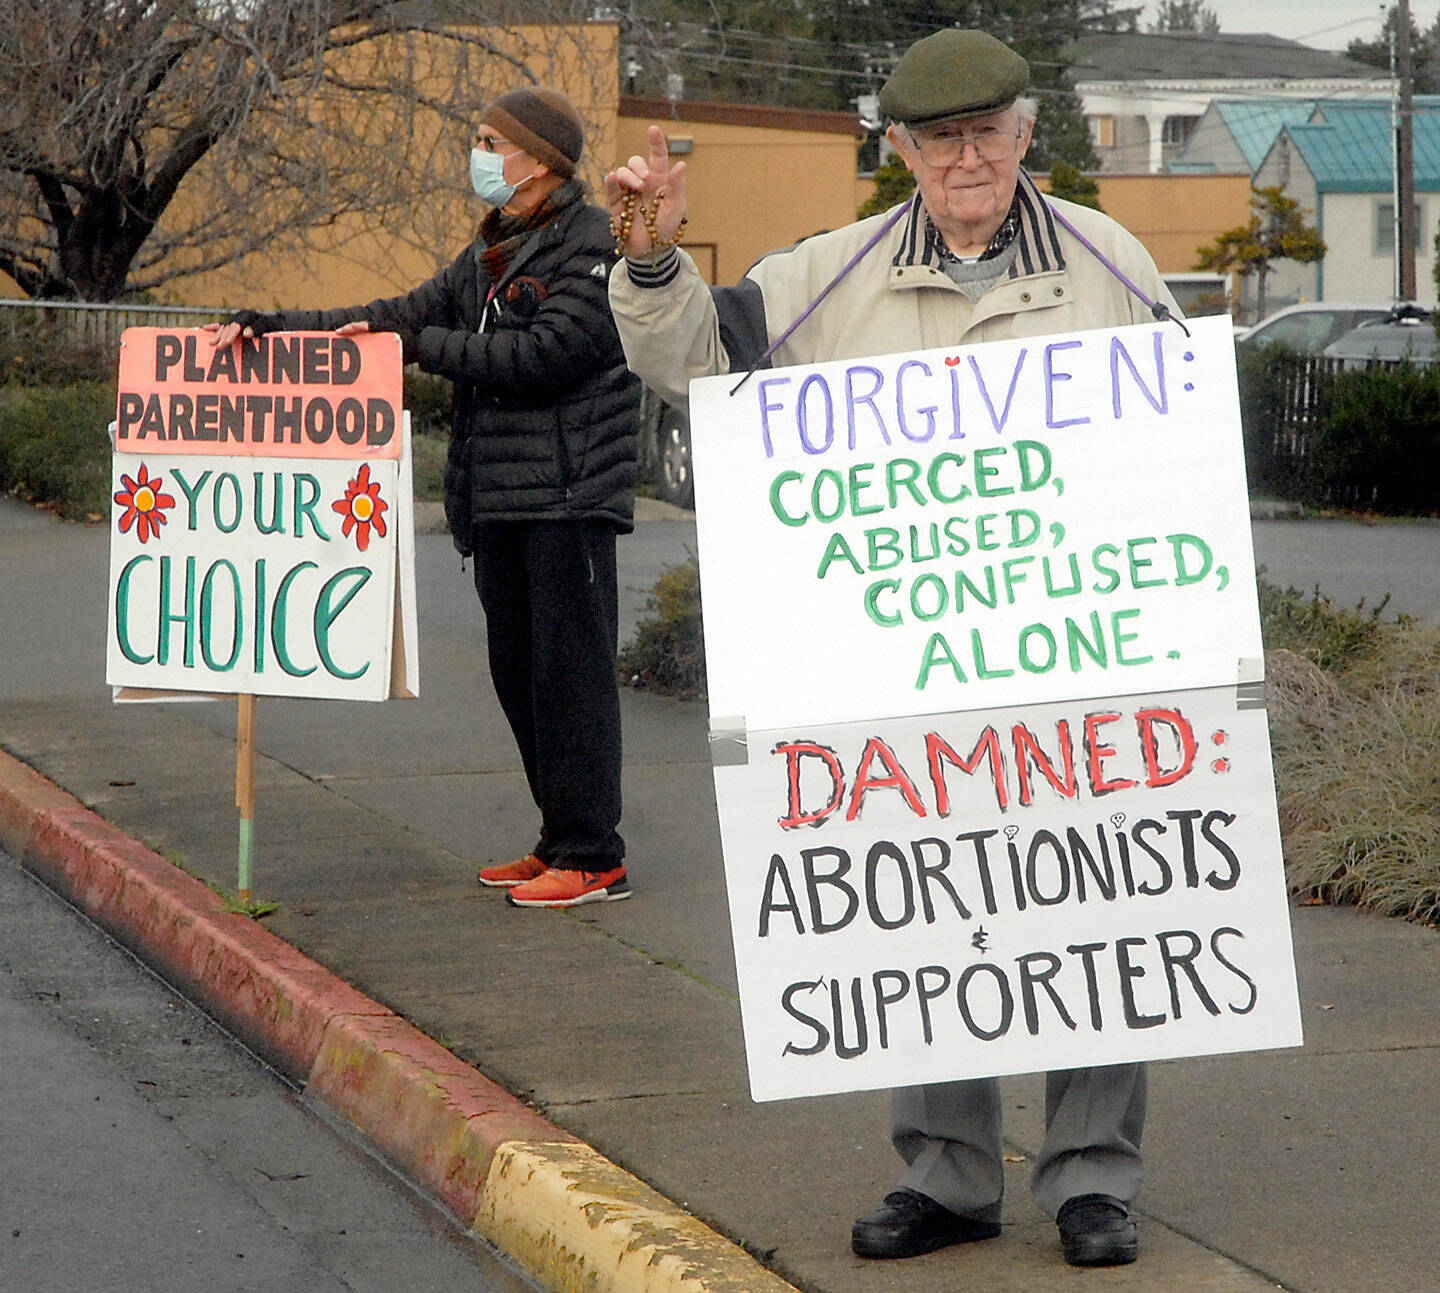 Pro-choice supporter Brian Hogan of Port Angeles, left, stands near pro-life supporter Jim Hanley of Sequim across from Planned Parenthood in Port Angeles. (Keith Thorpe/Peninsula Daily News)